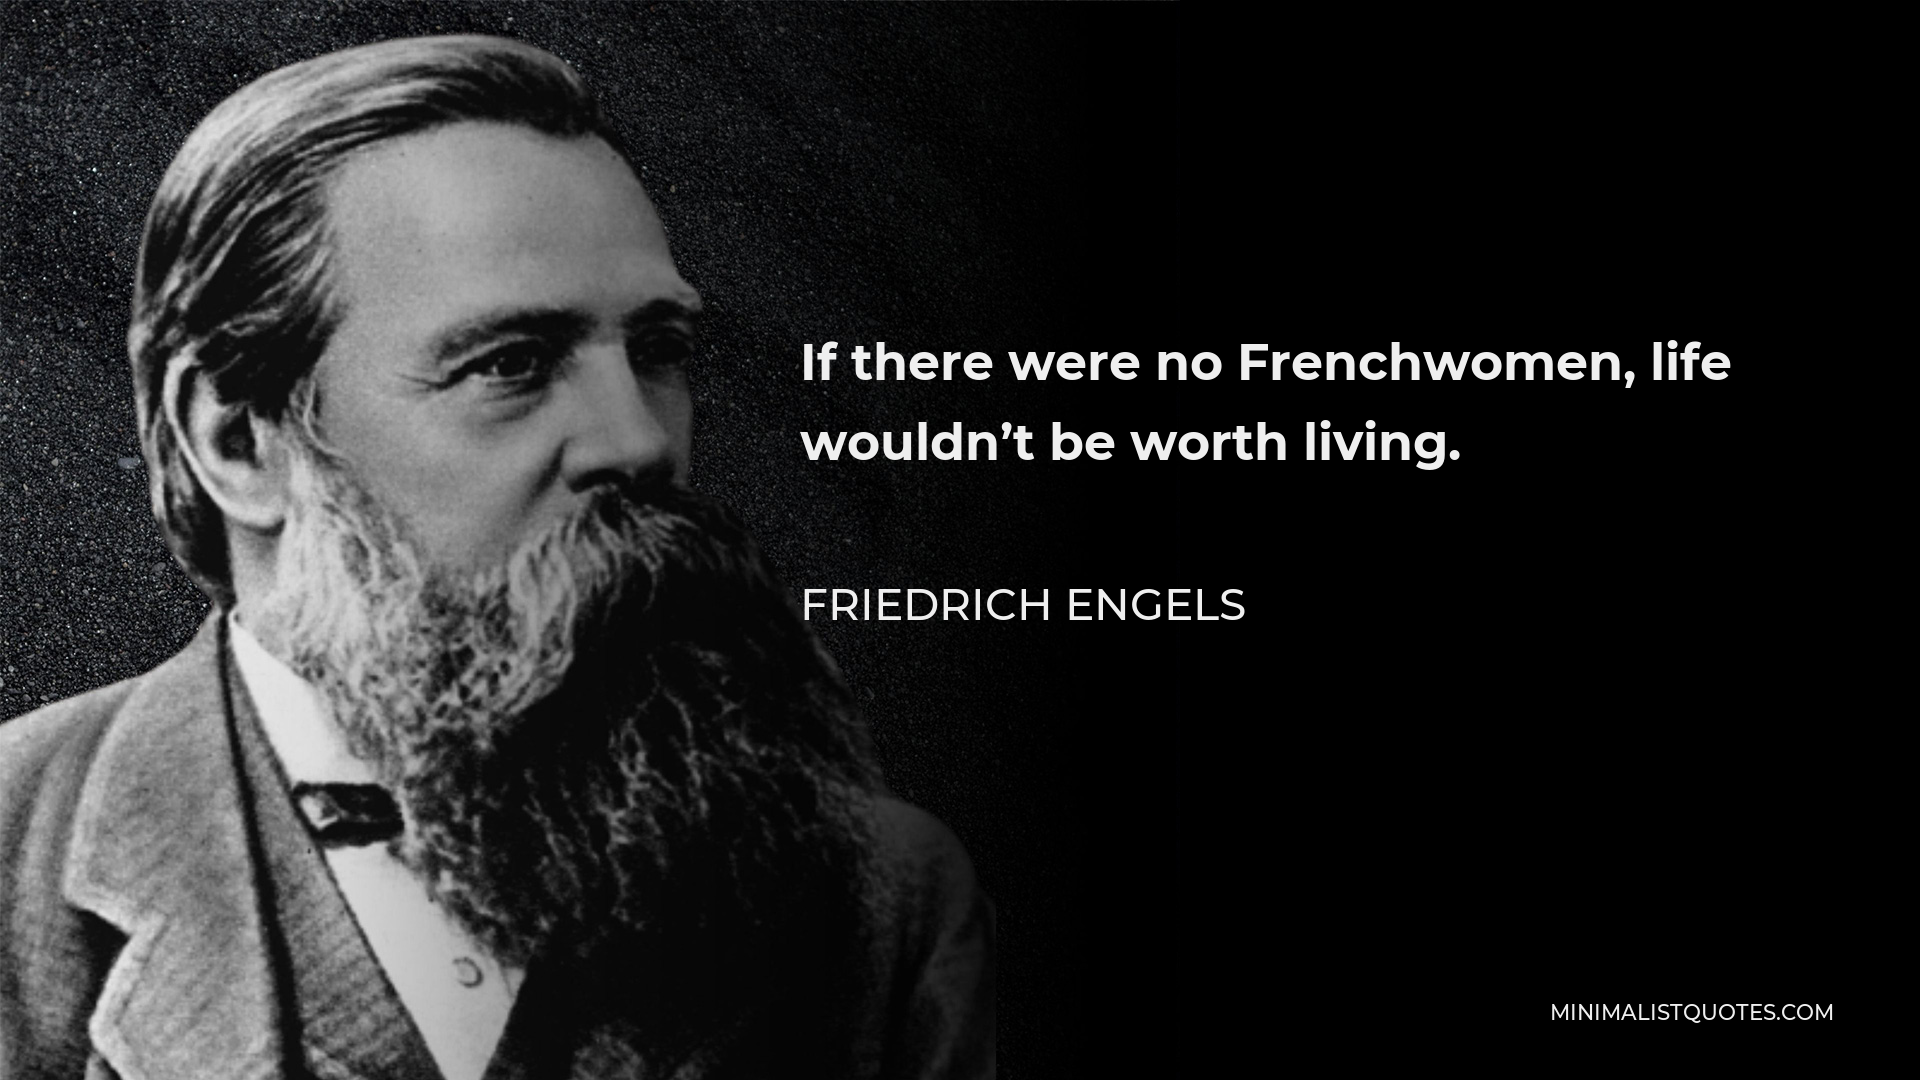 Friedrich Engels Quote - If there were no Frenchwomen, life wouldn’t be worth living.